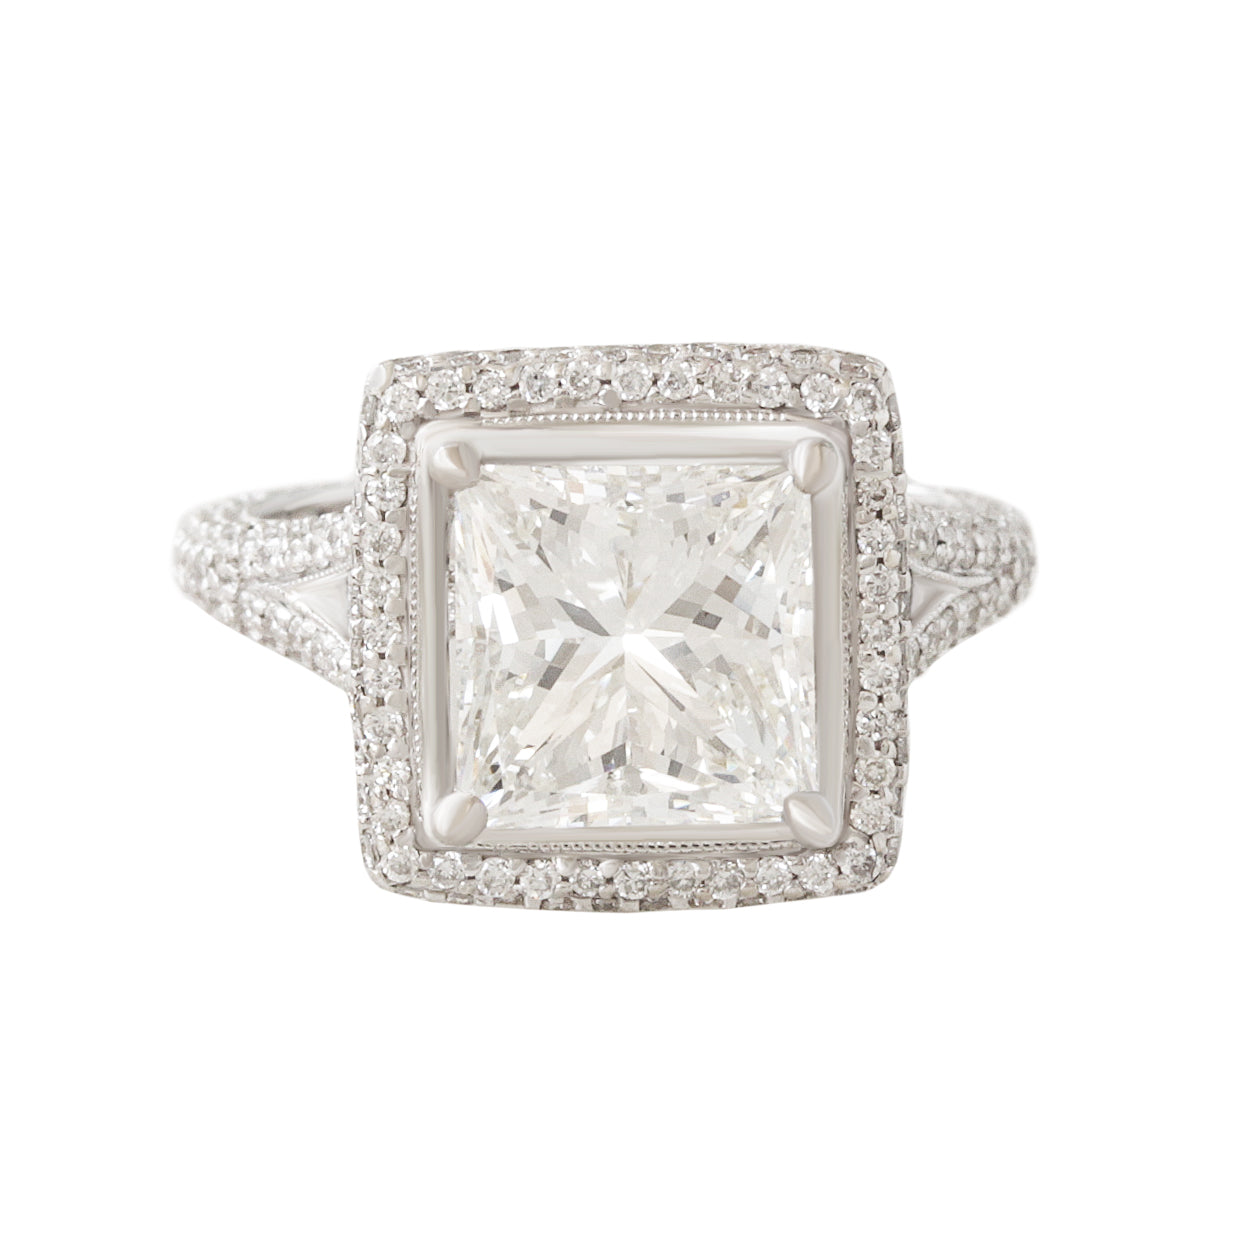 3CT Princess Cut Diamond Pave Halo, engagement ring and pendant, GIA certified.